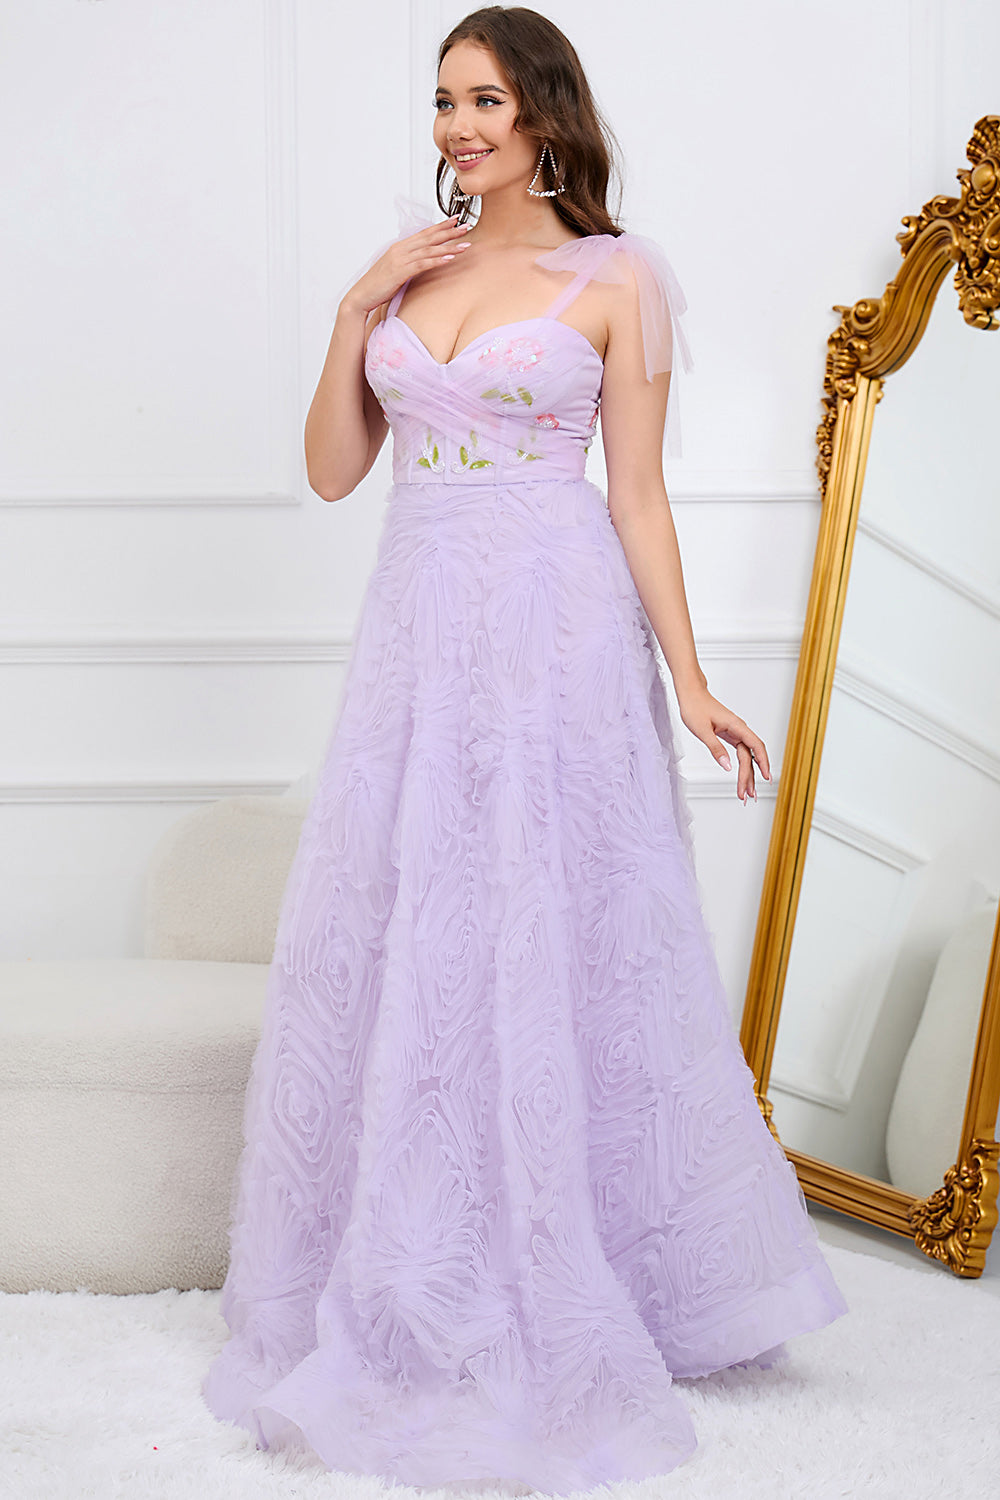 Zapaka Purple Prom Dress A-Line Spaghetti Straps Tulle Party Dress with Appliques, Purple / US14